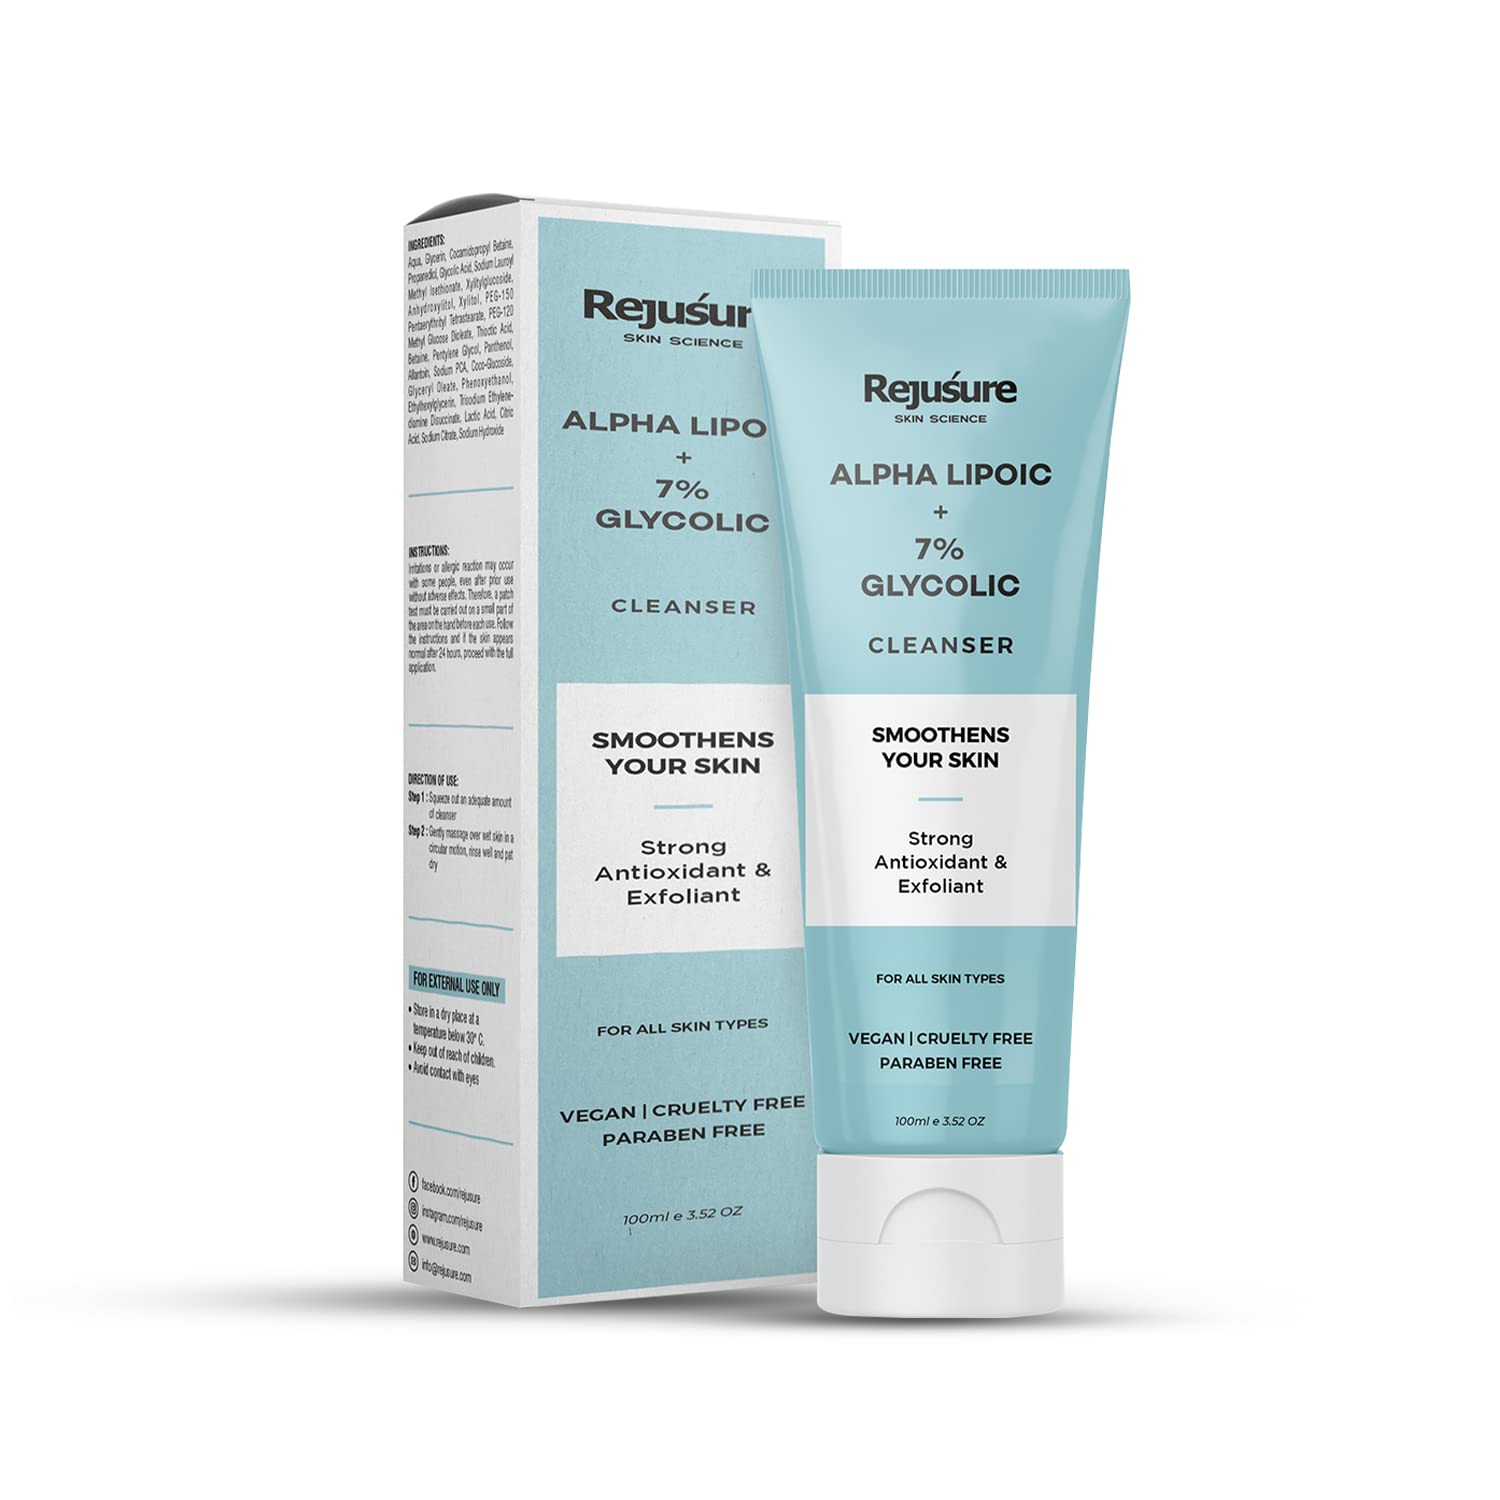 Rejusure Alpha Lipoic + Glycolic 7% Face Cleanser for Brightening Skin Shade & Evening Skin Texture | All Skin Types | For Men & Women | Cruelty Free & Dermatologist Tested – 100 ml